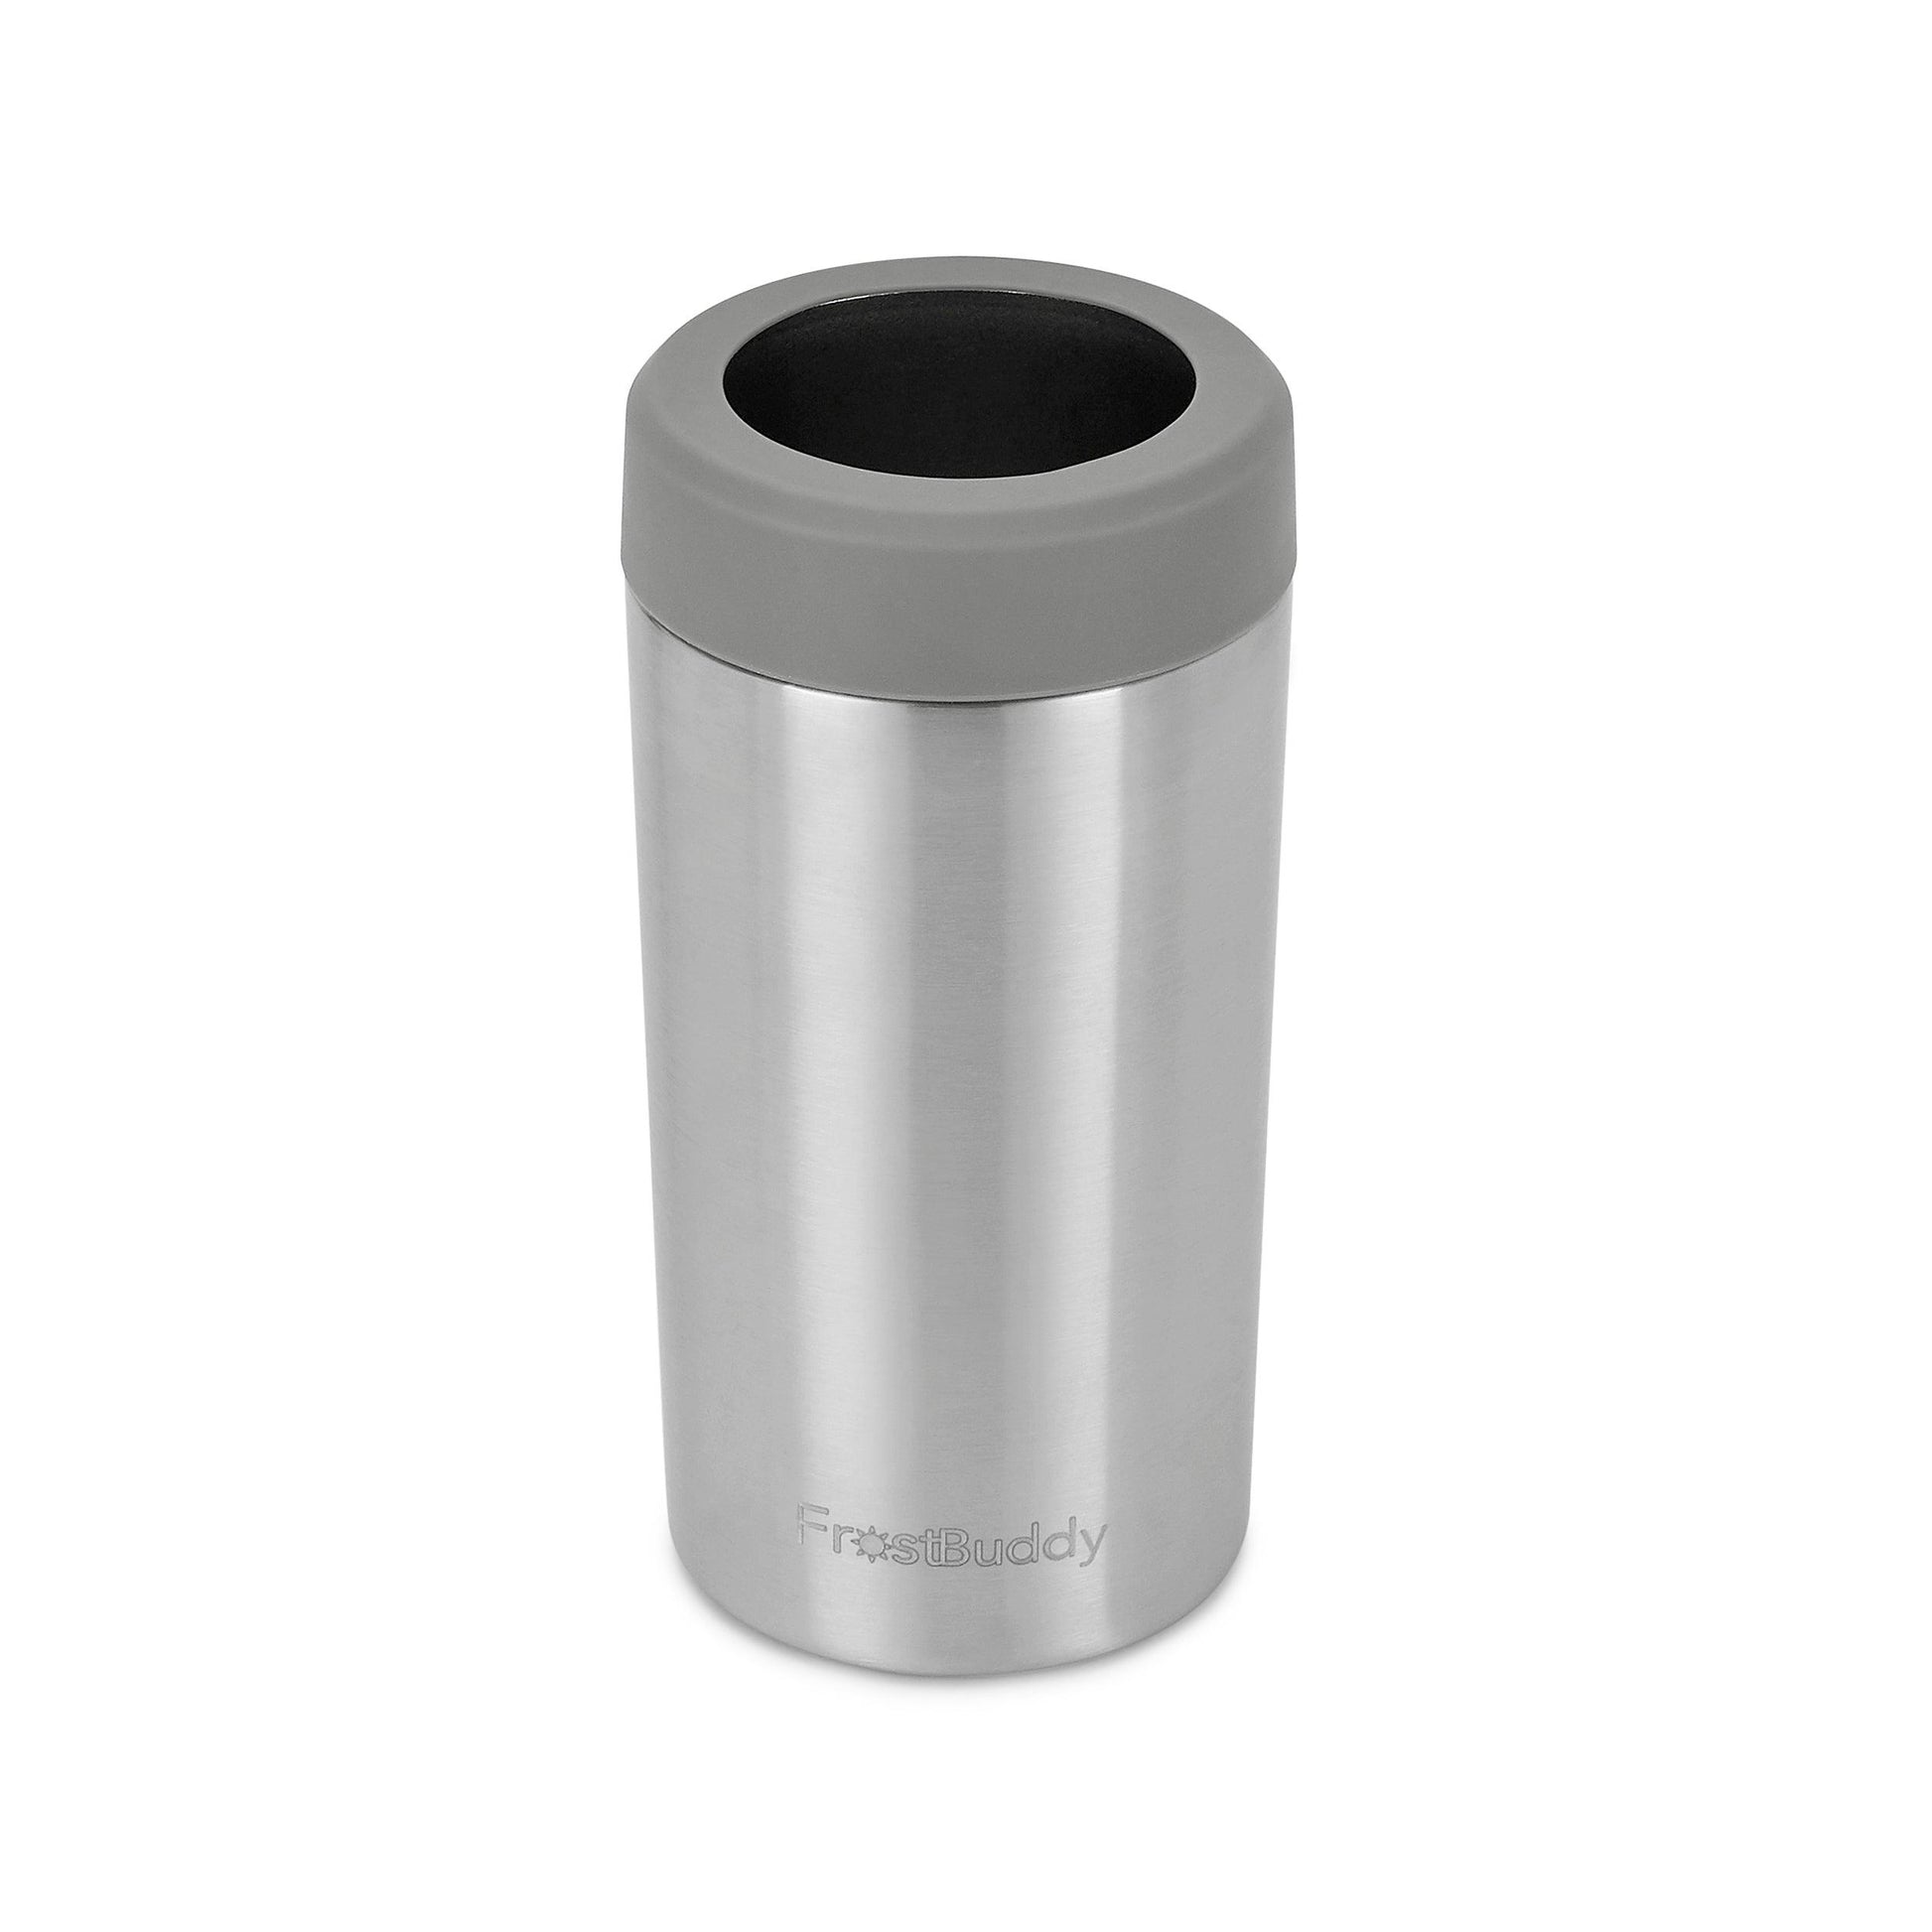 Frost Buddy 2.0 Can Cooler – Stealth Steel Designs